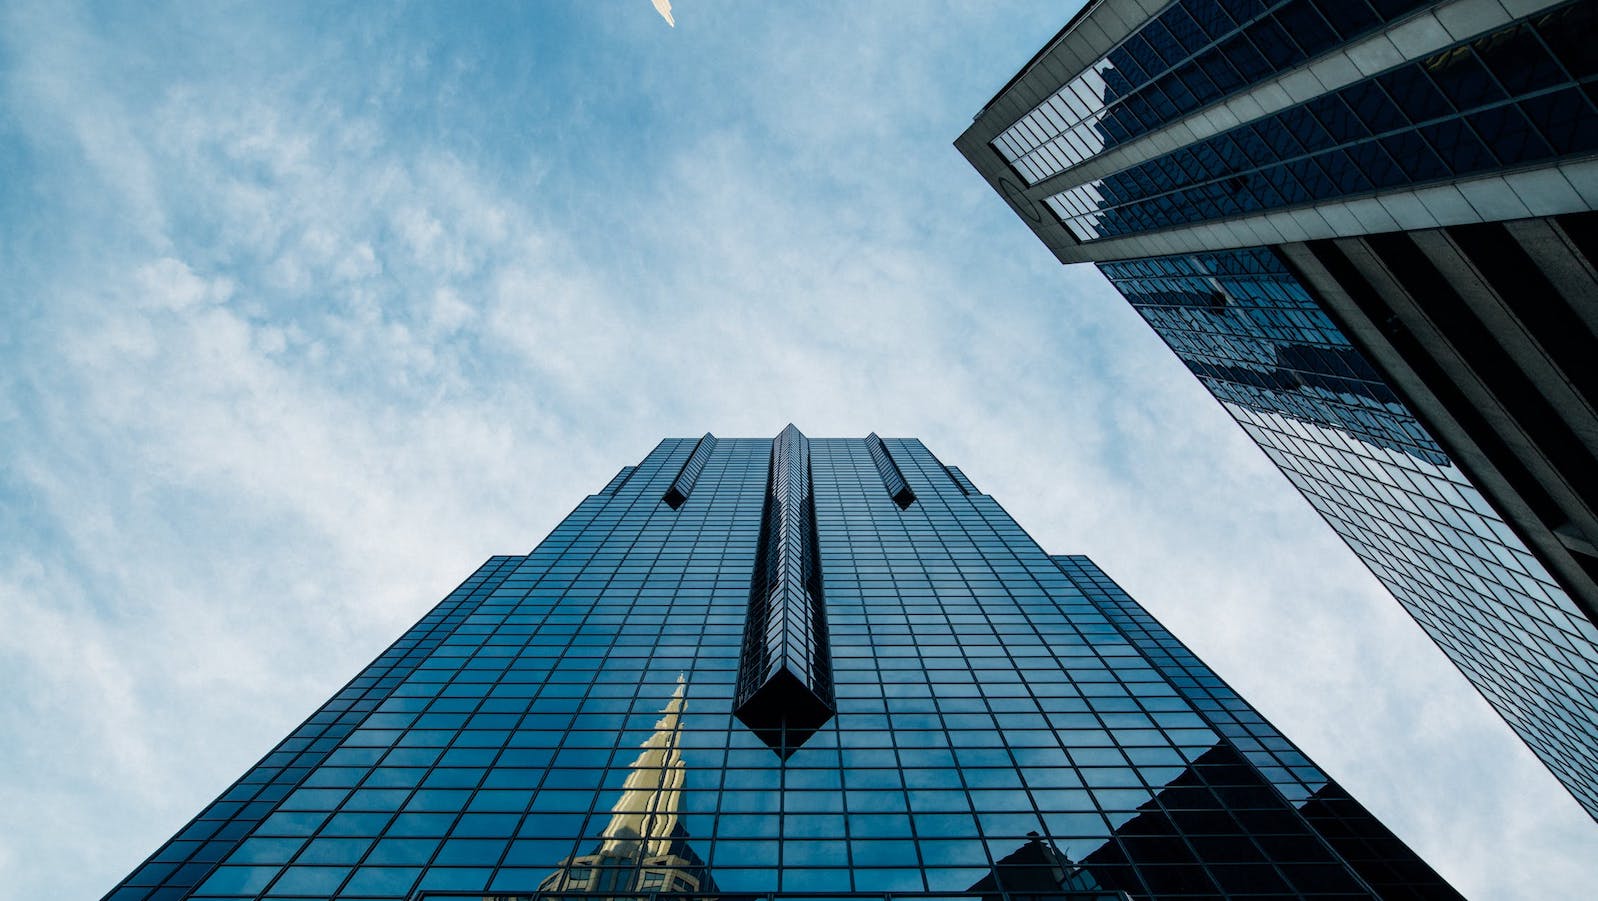 low-angle image of a tall glass building under a blue and cloudy sky